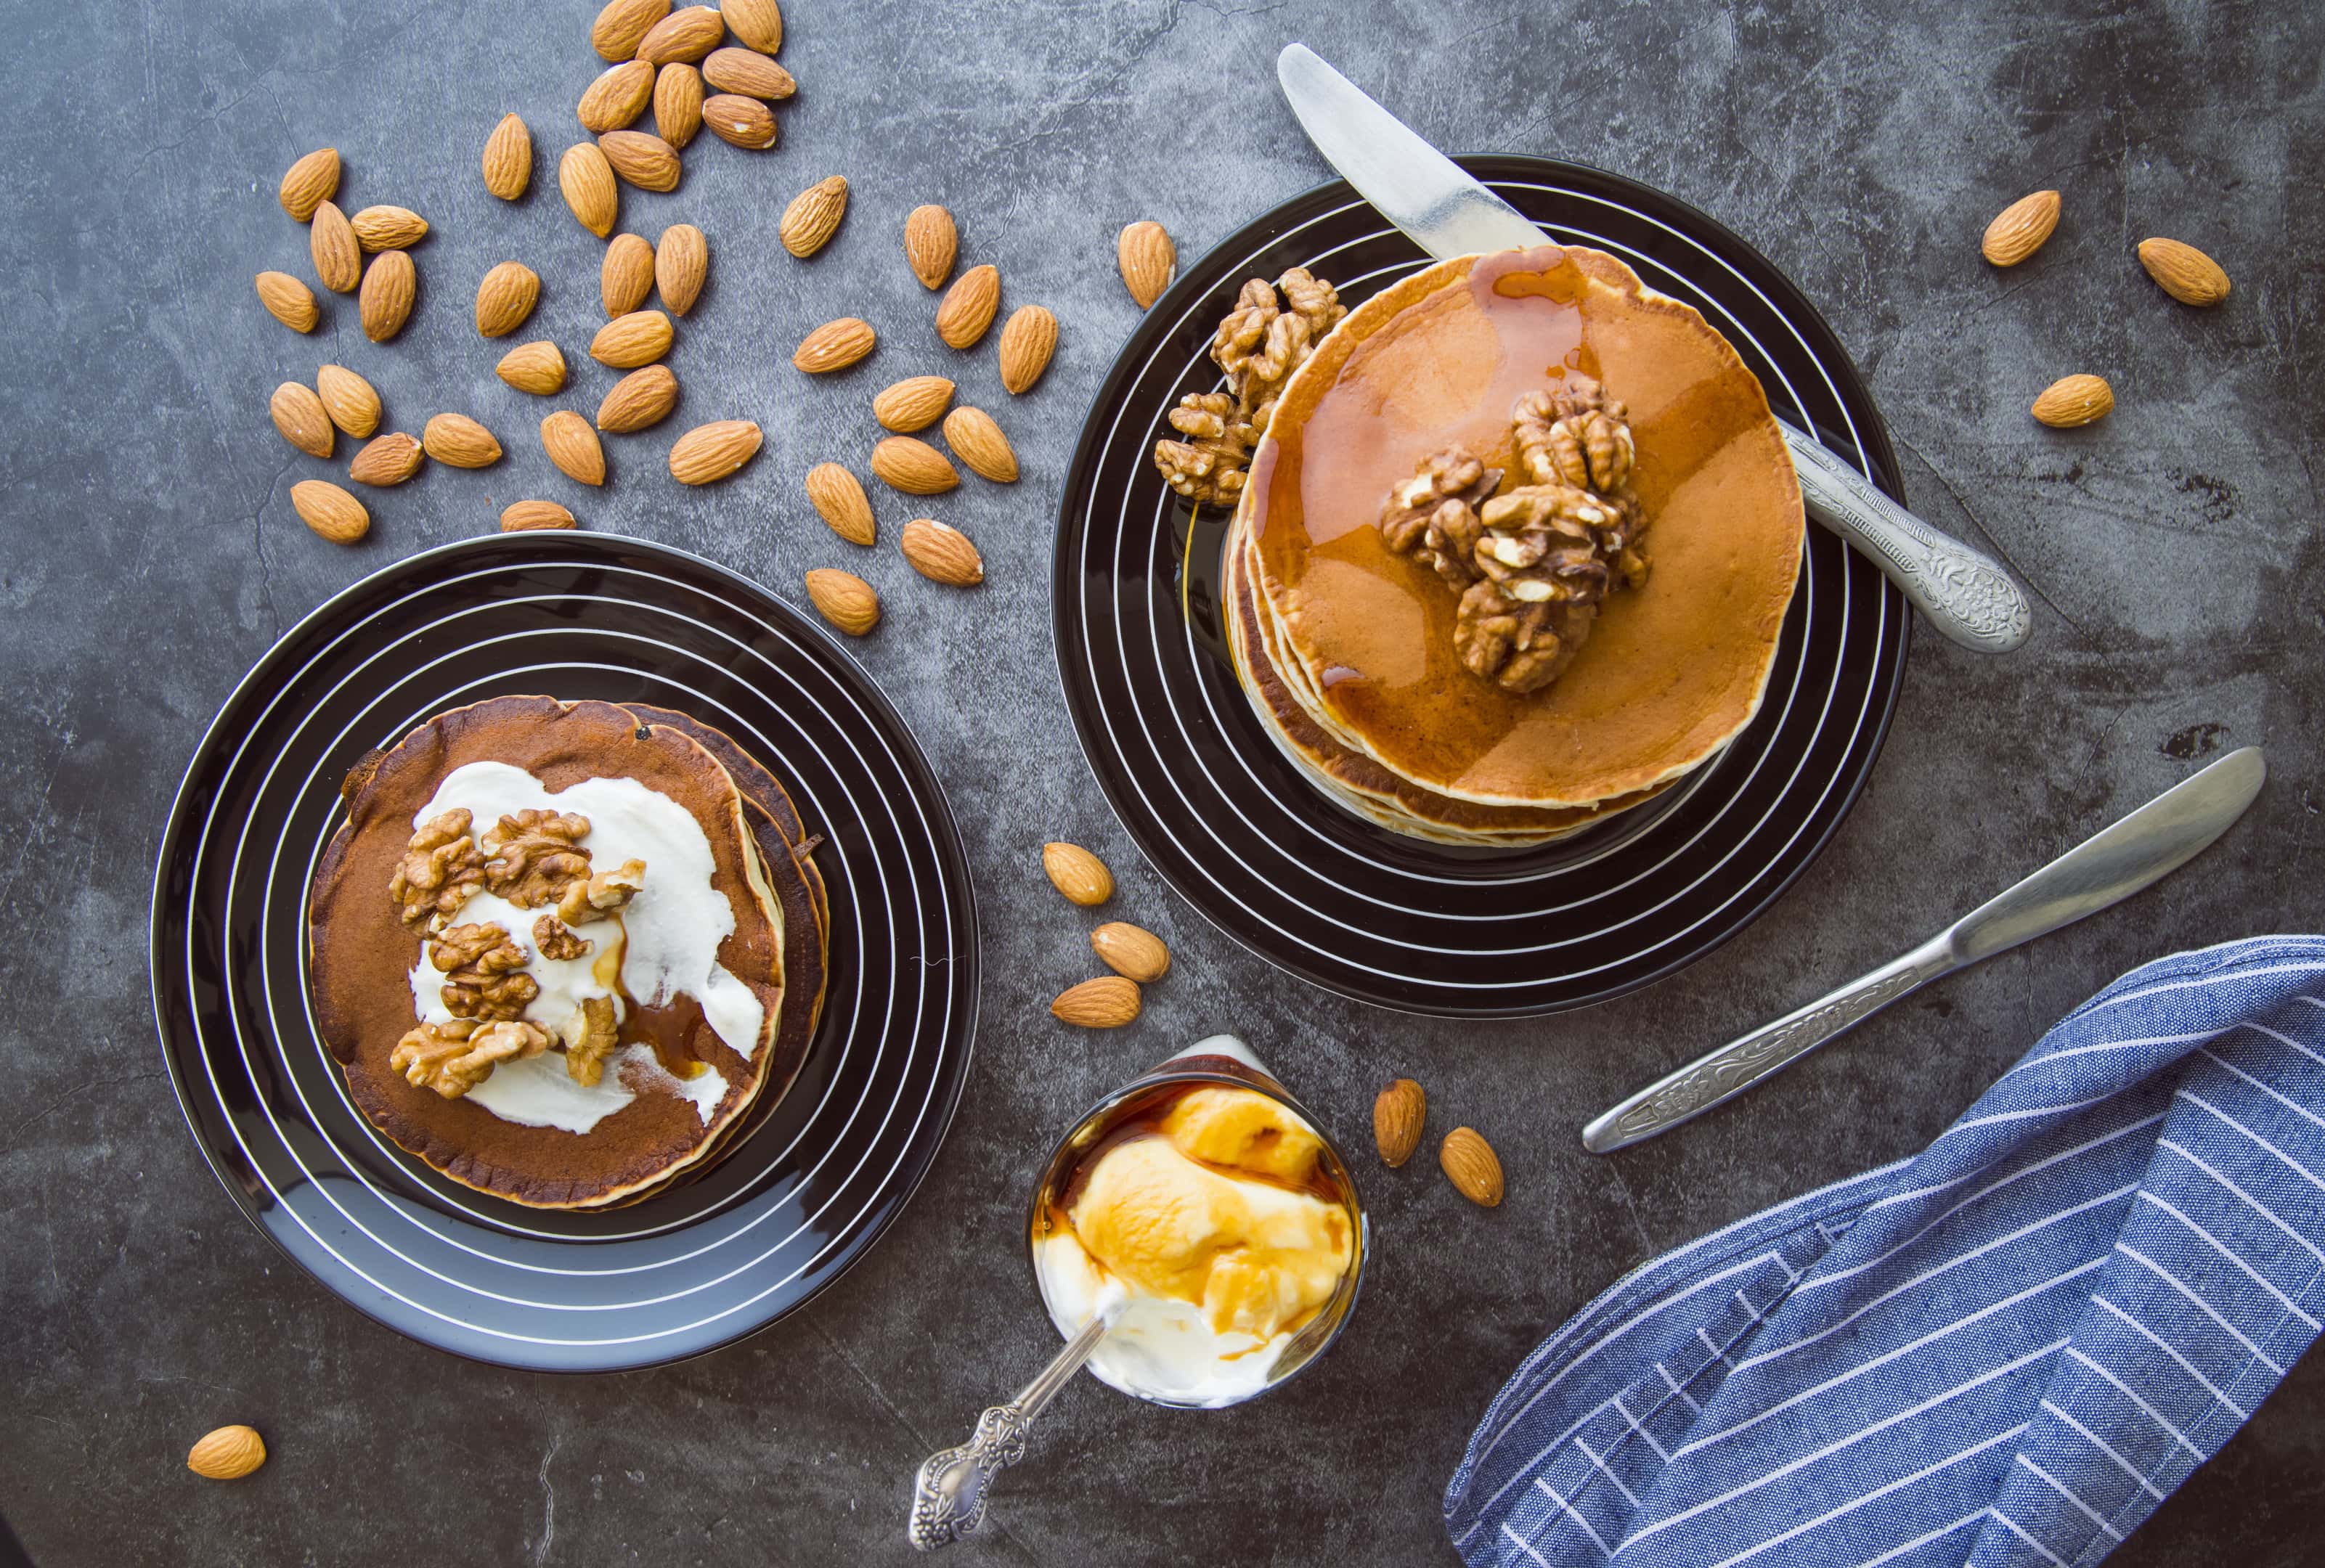 Delicious pancakes with almonds and walnuts